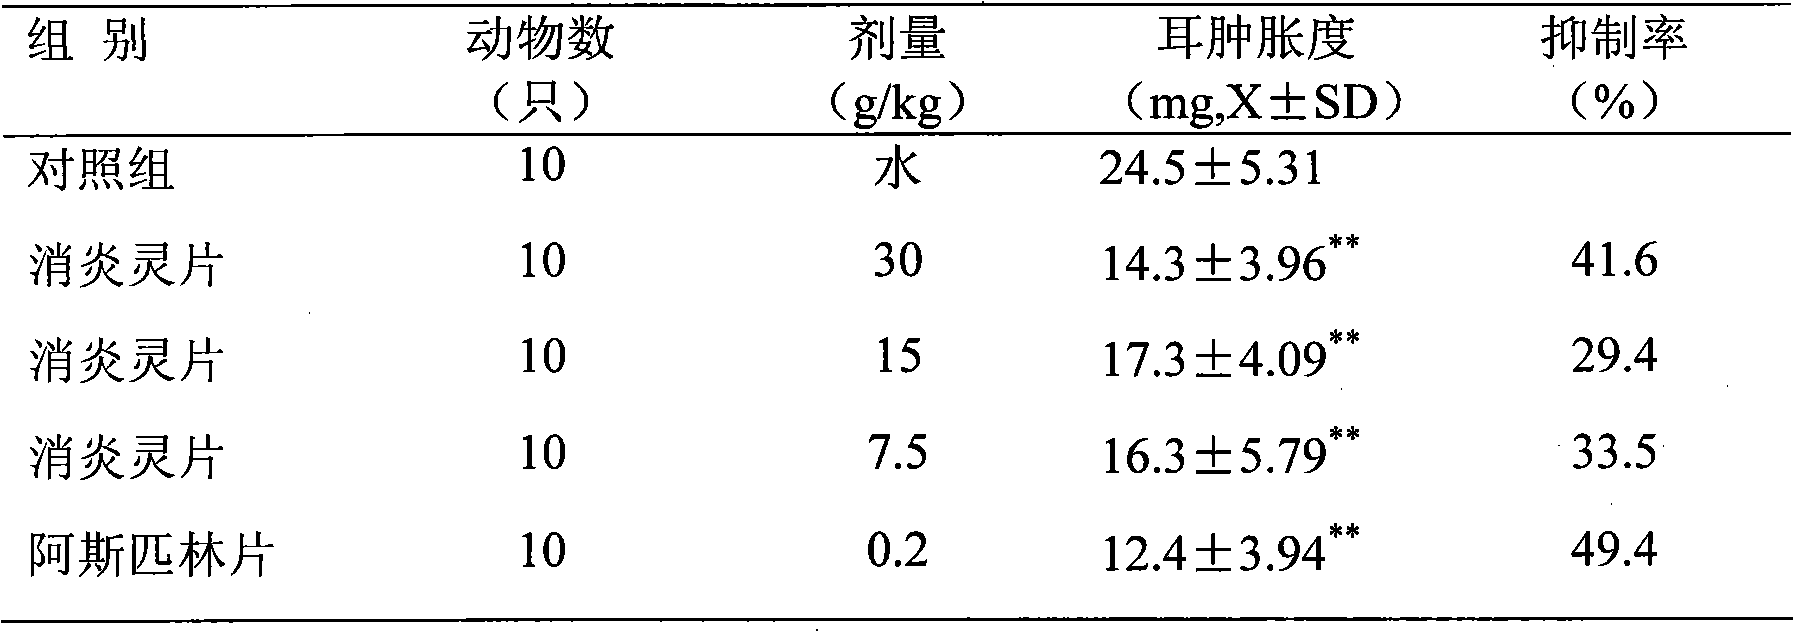 Complex traditional Chinese medicine preparation for treating upper respiratory tract infection and preparation method thereof